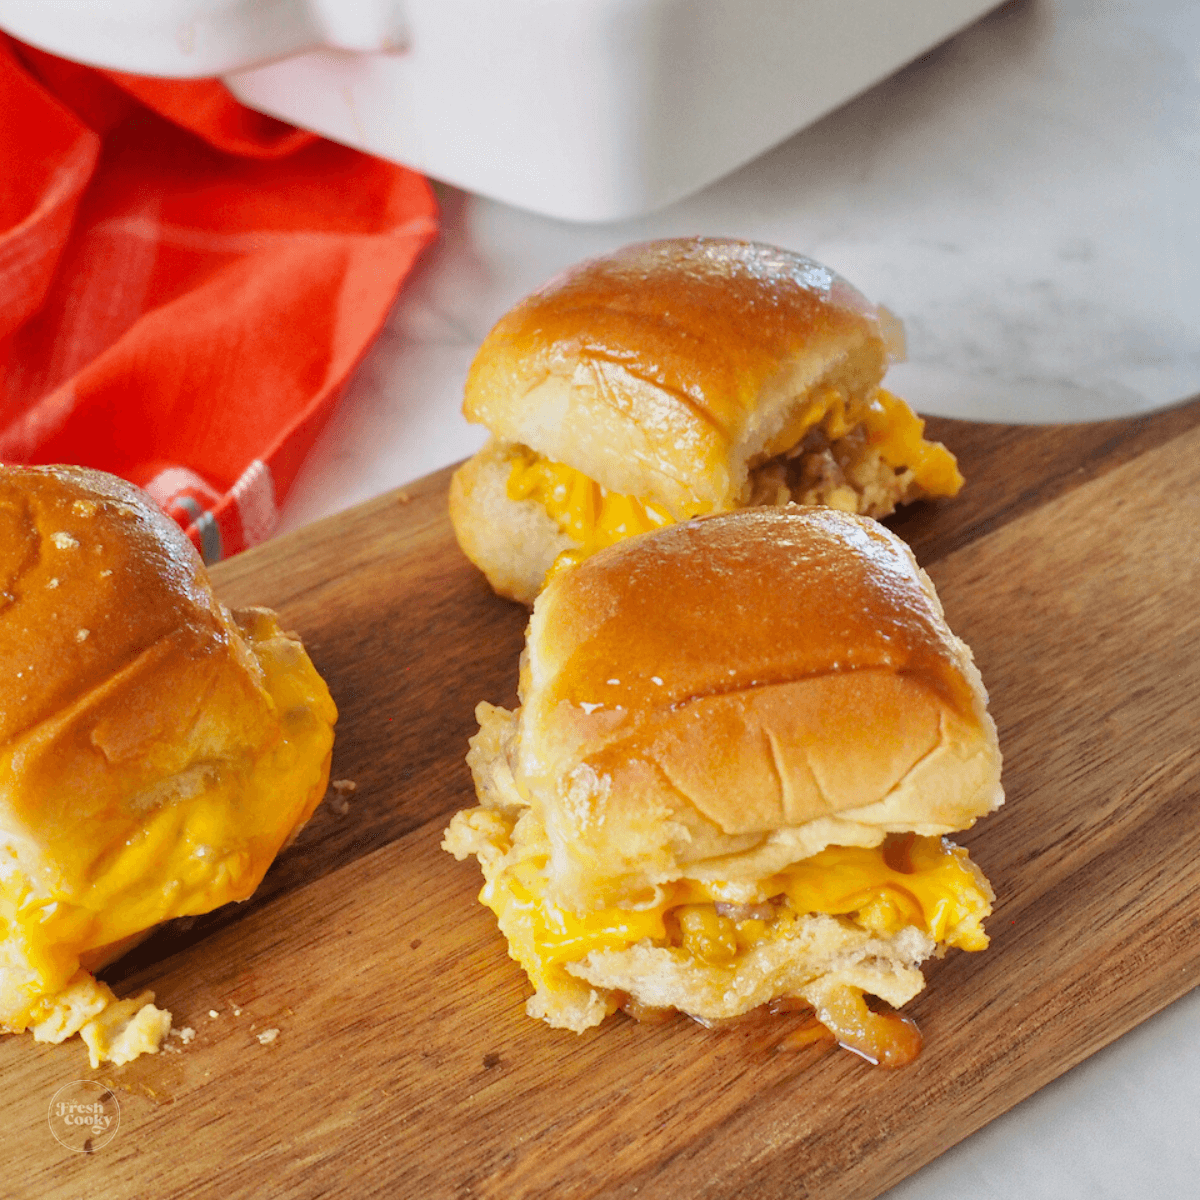 Make delicious egg bites and sandwiches at home in just 10 minutes